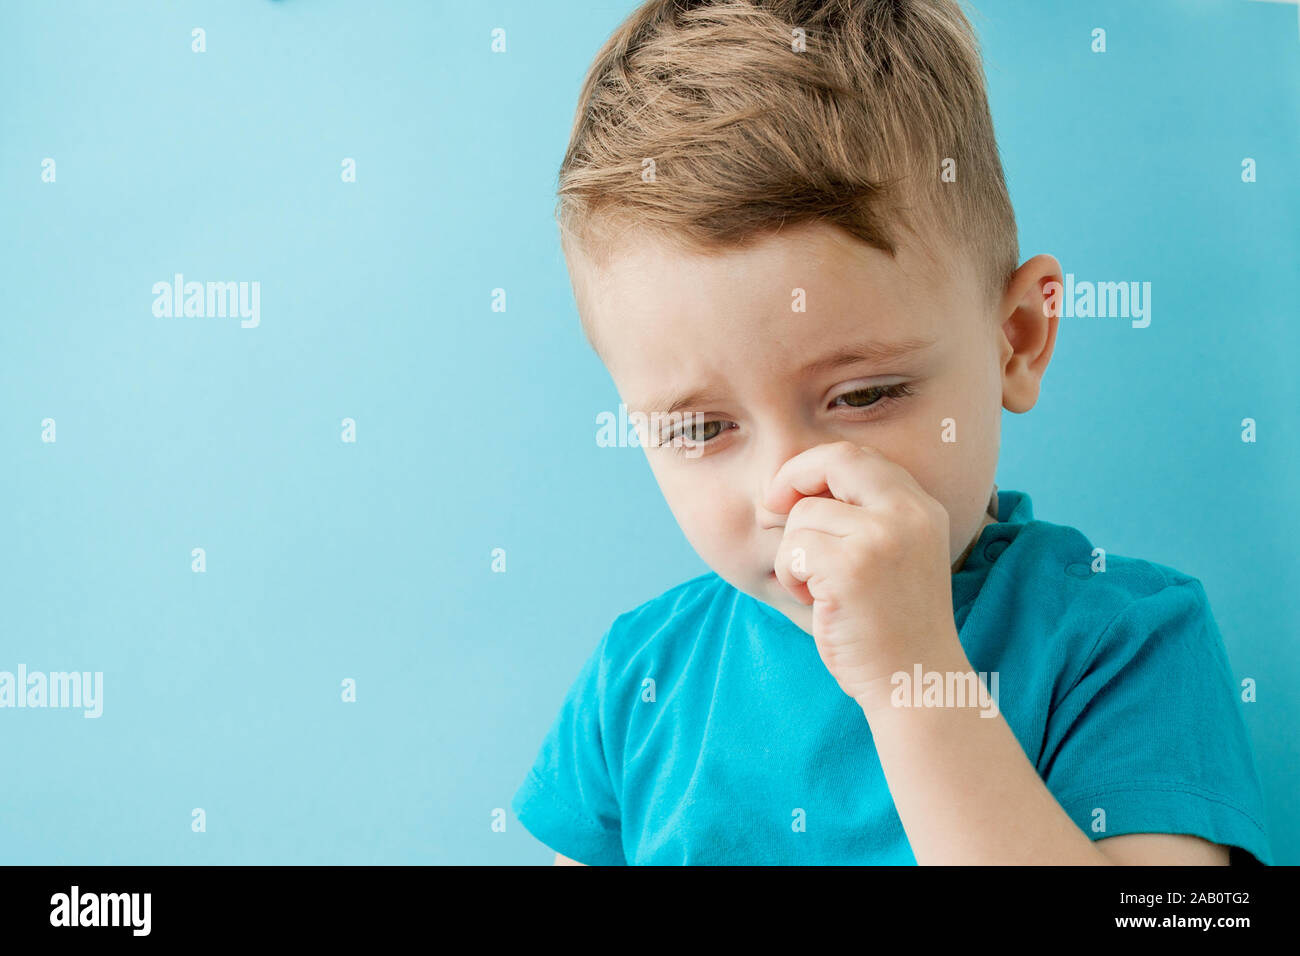 Little caucasian boy picking his nose on blue background. Stock Photo